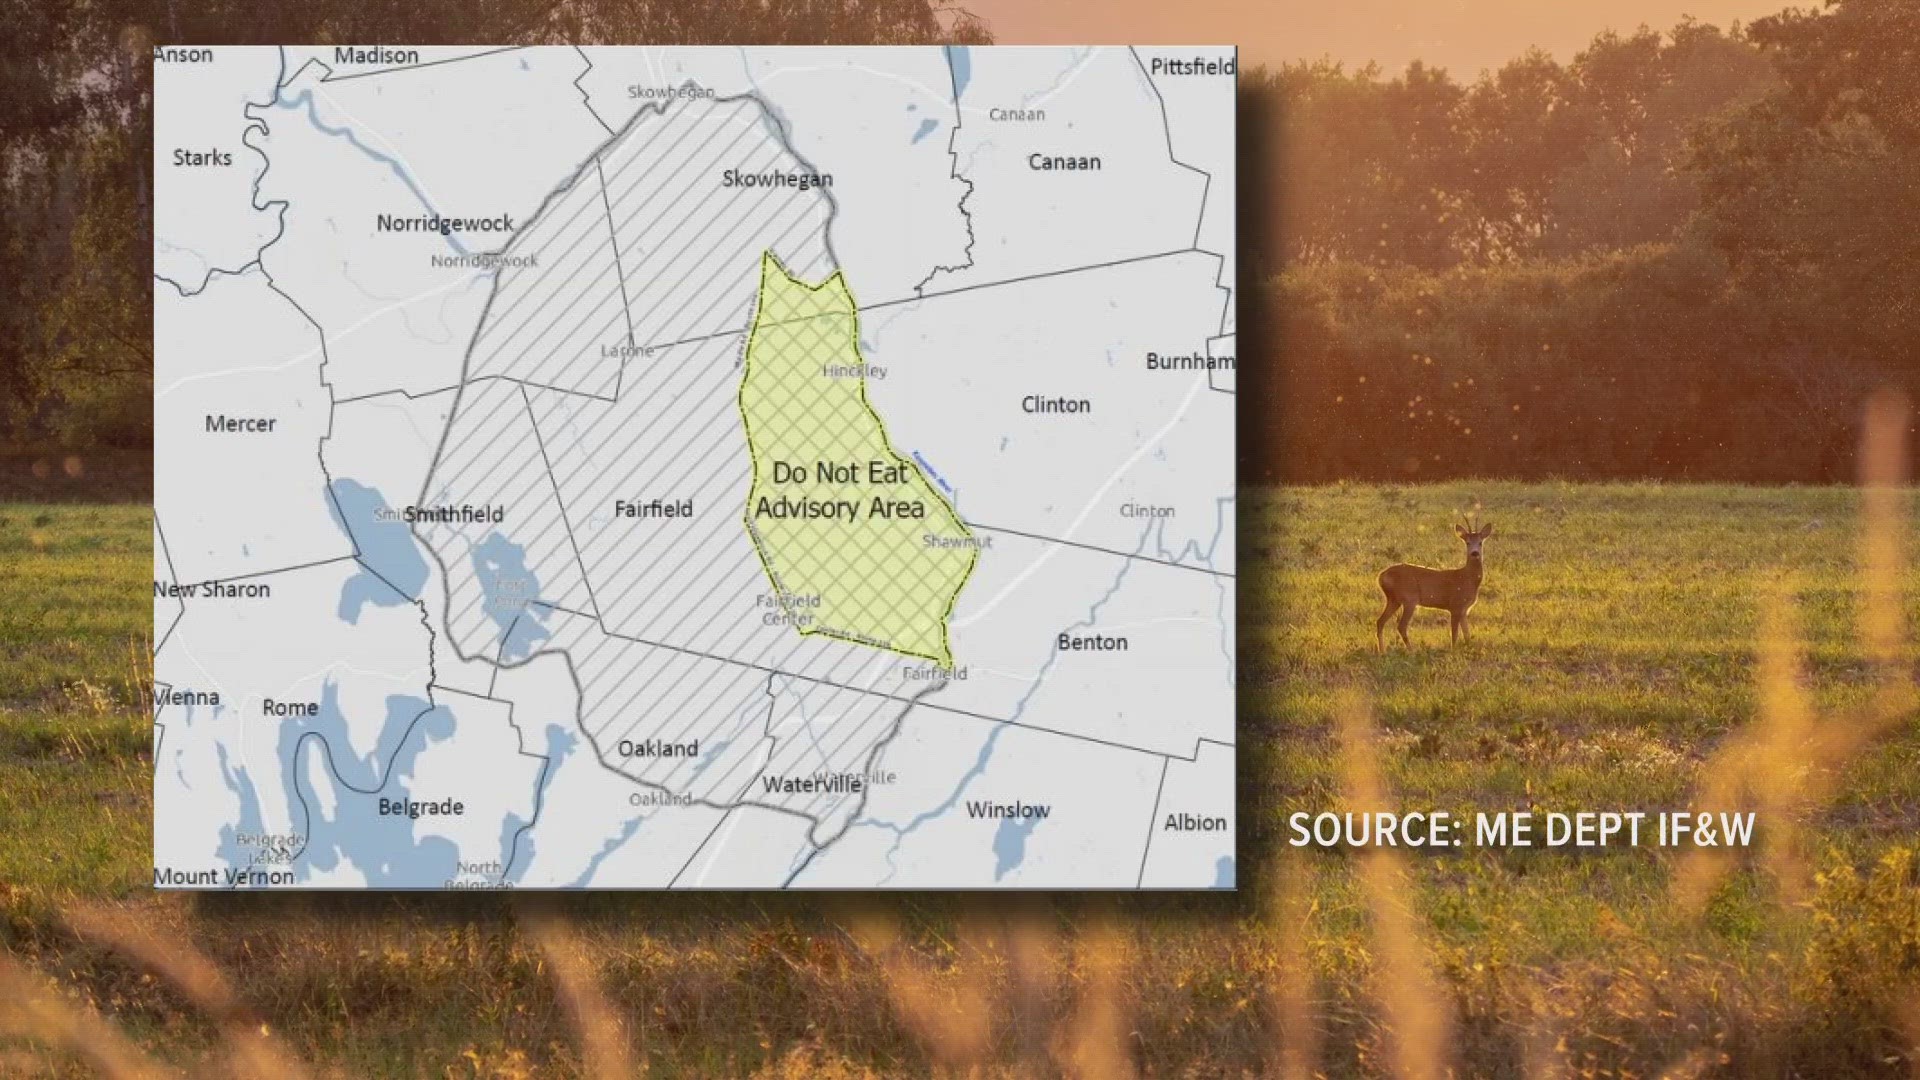 "The MDIFW and the Maine CDC recommend that no one eats deer or wild turkey harvested in this 25 square mile area," a release said.